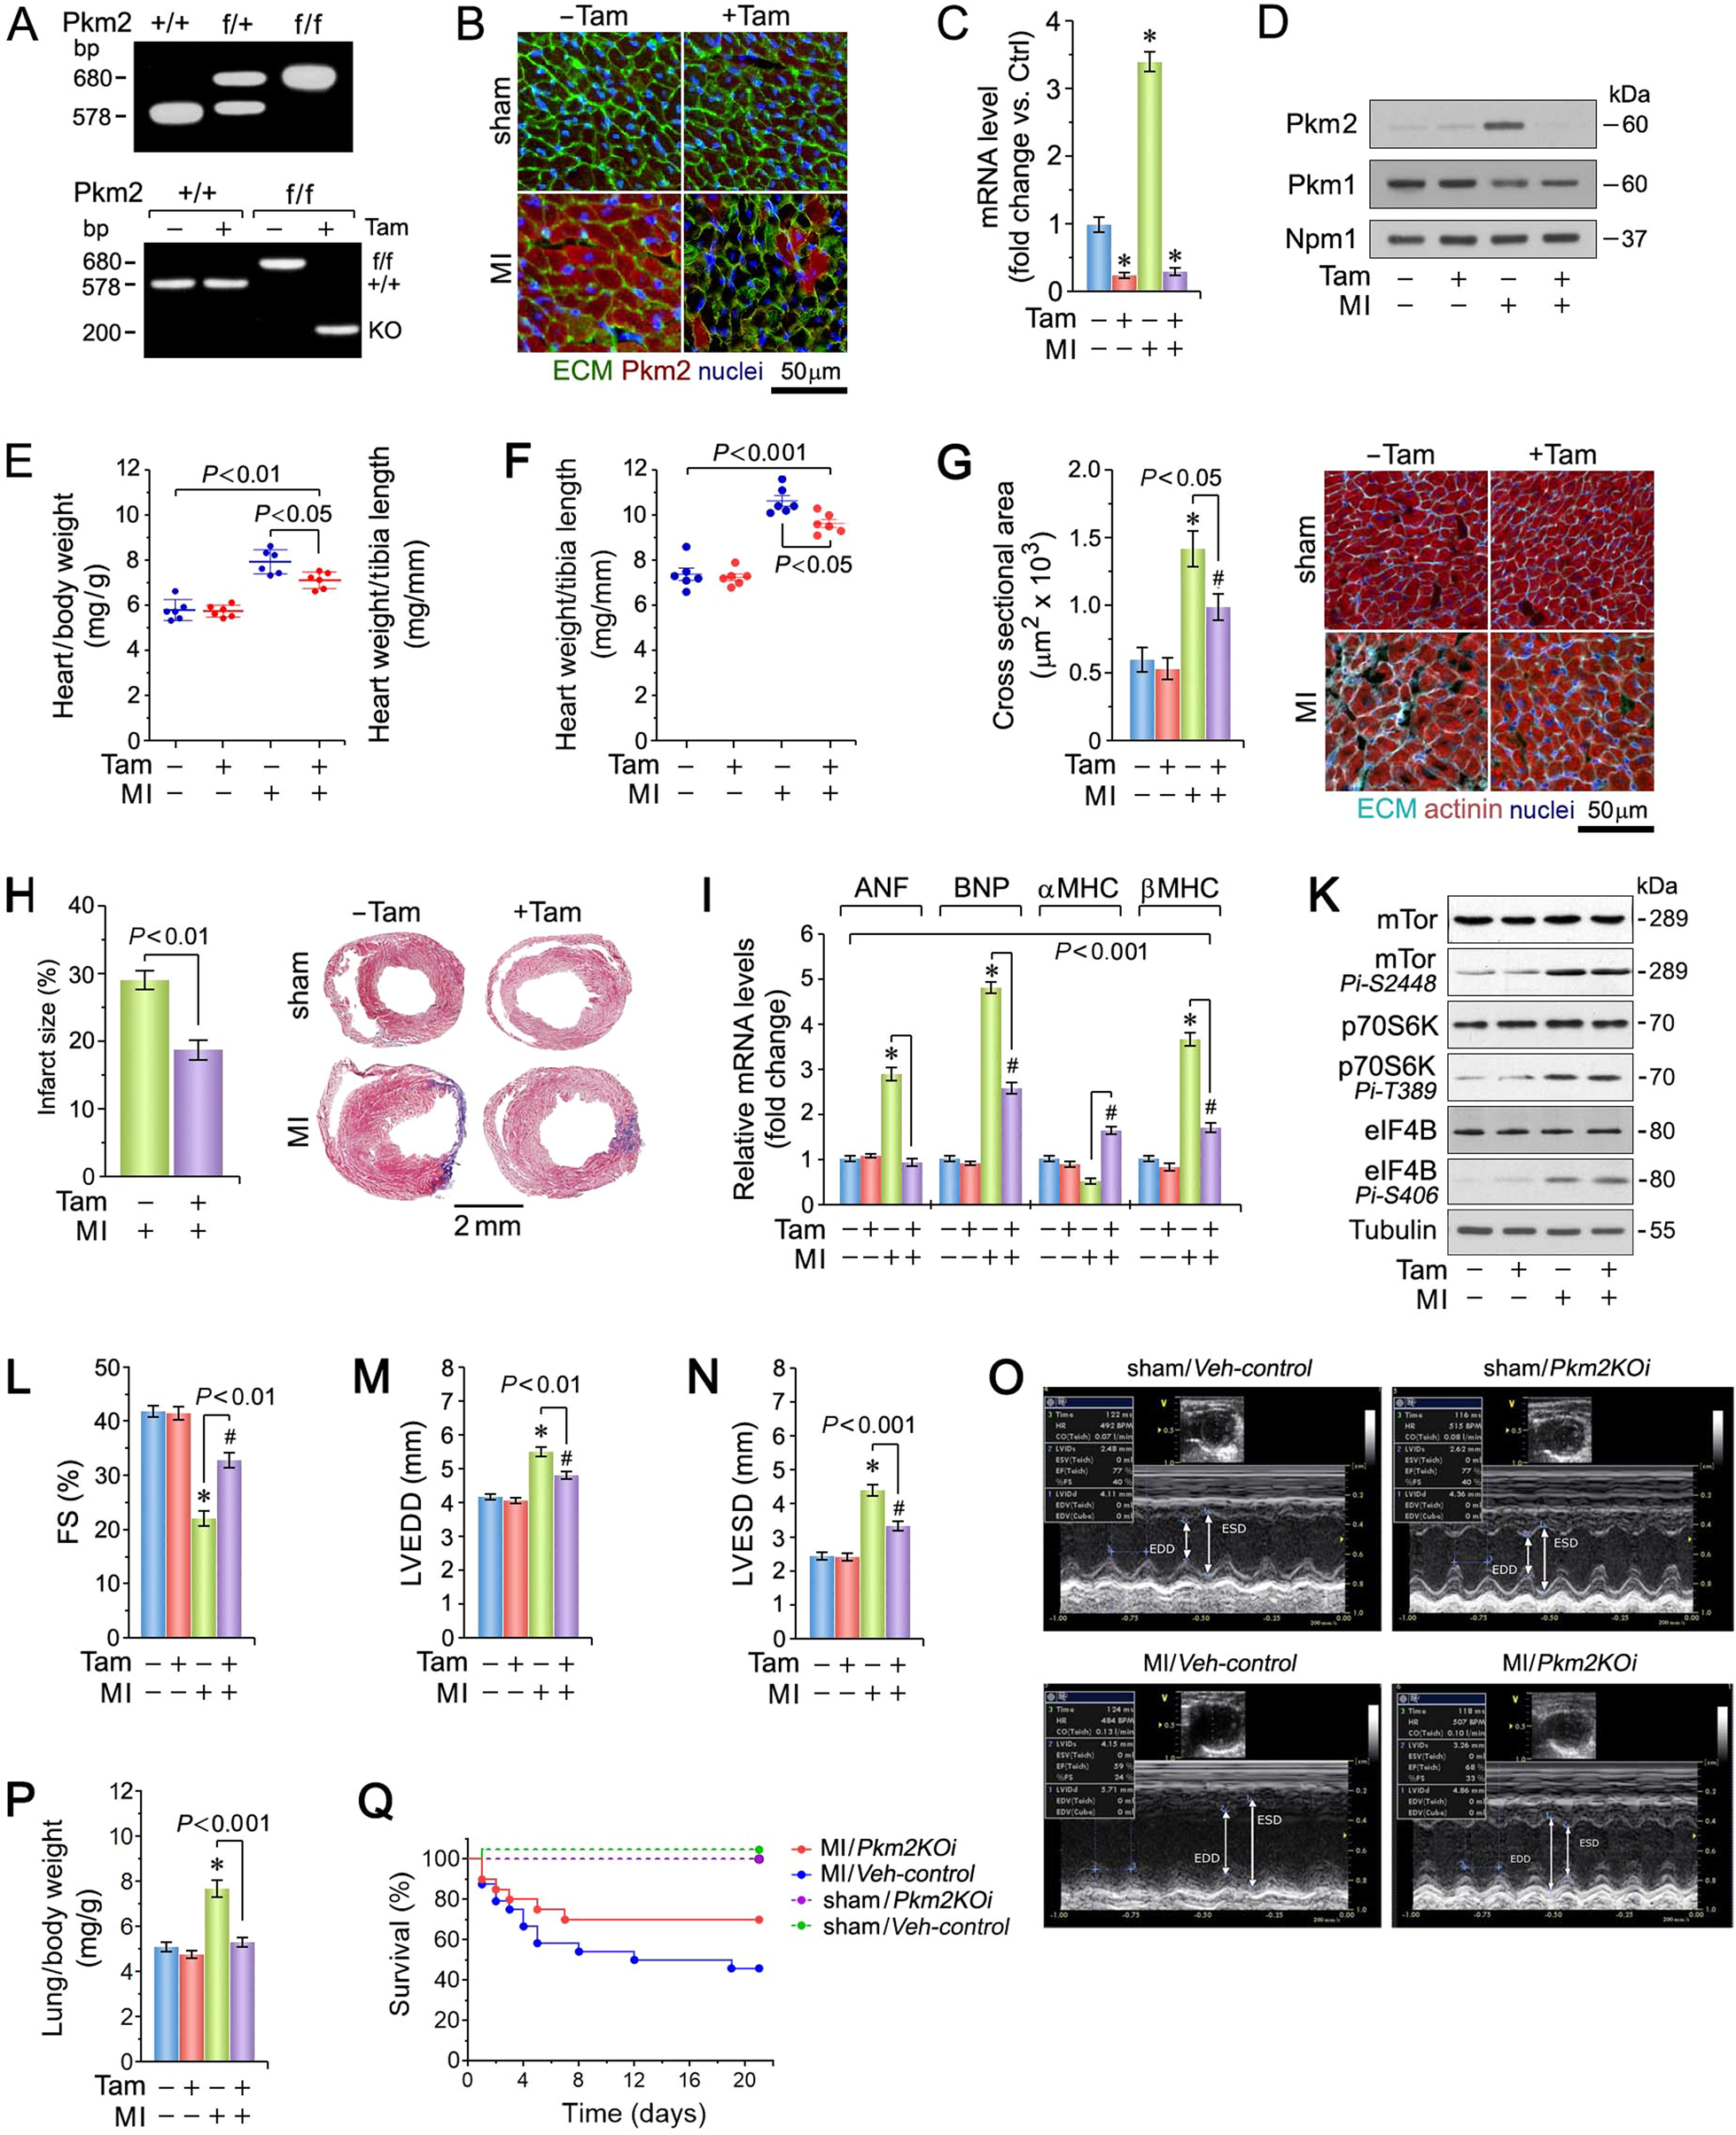 Inhibiting the Pkm2/b-catenin axis drives in vivo replication of adult  cardiomyocytes following experimental MI | Cell Death & Differentiation